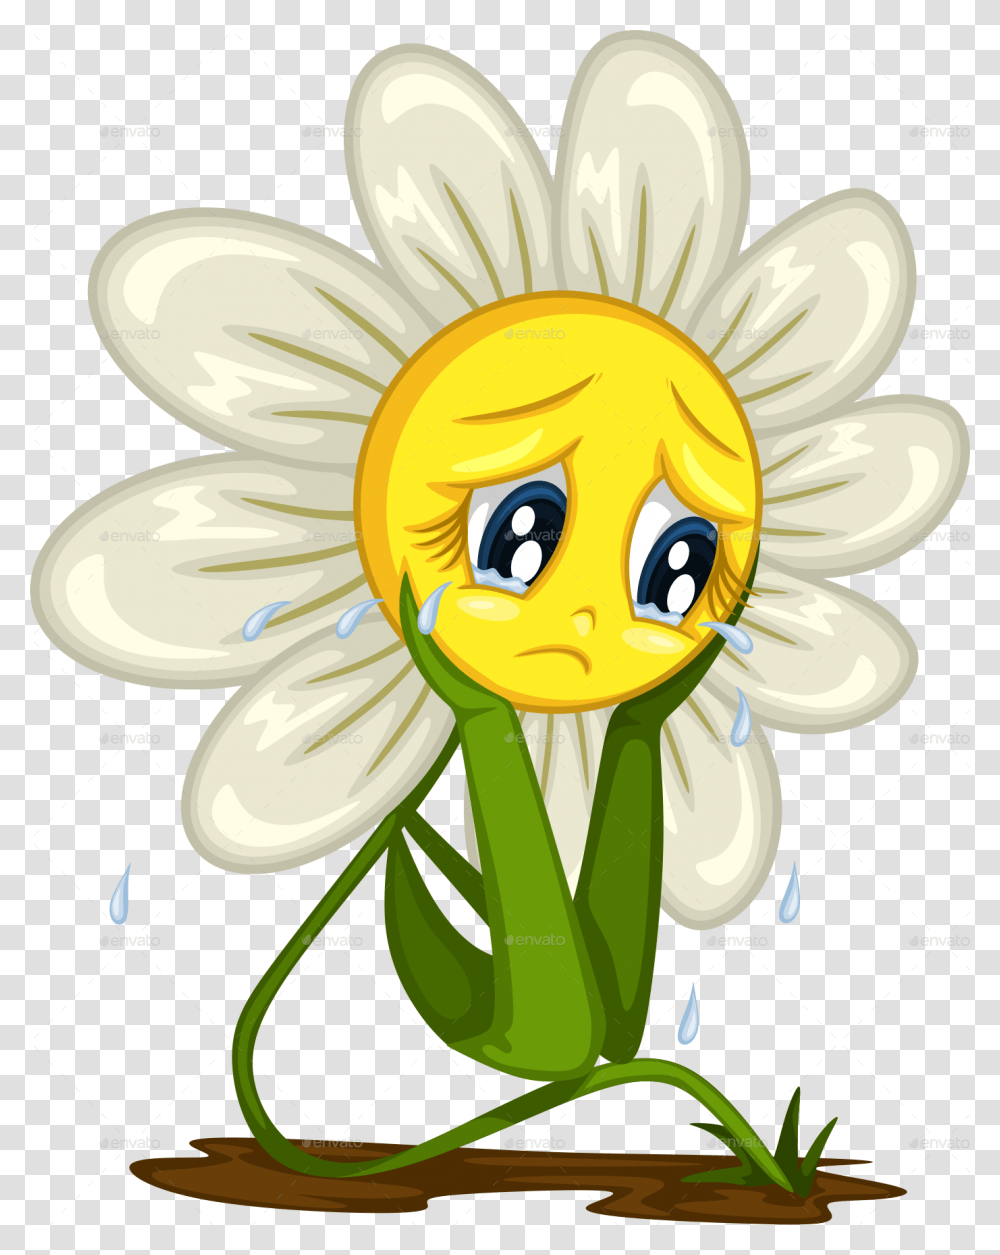 Cartoon Stickers For Different Situations By Anniesart Crying Cartoon, Plant, Flower, Blossom, Daisy Transparent Png